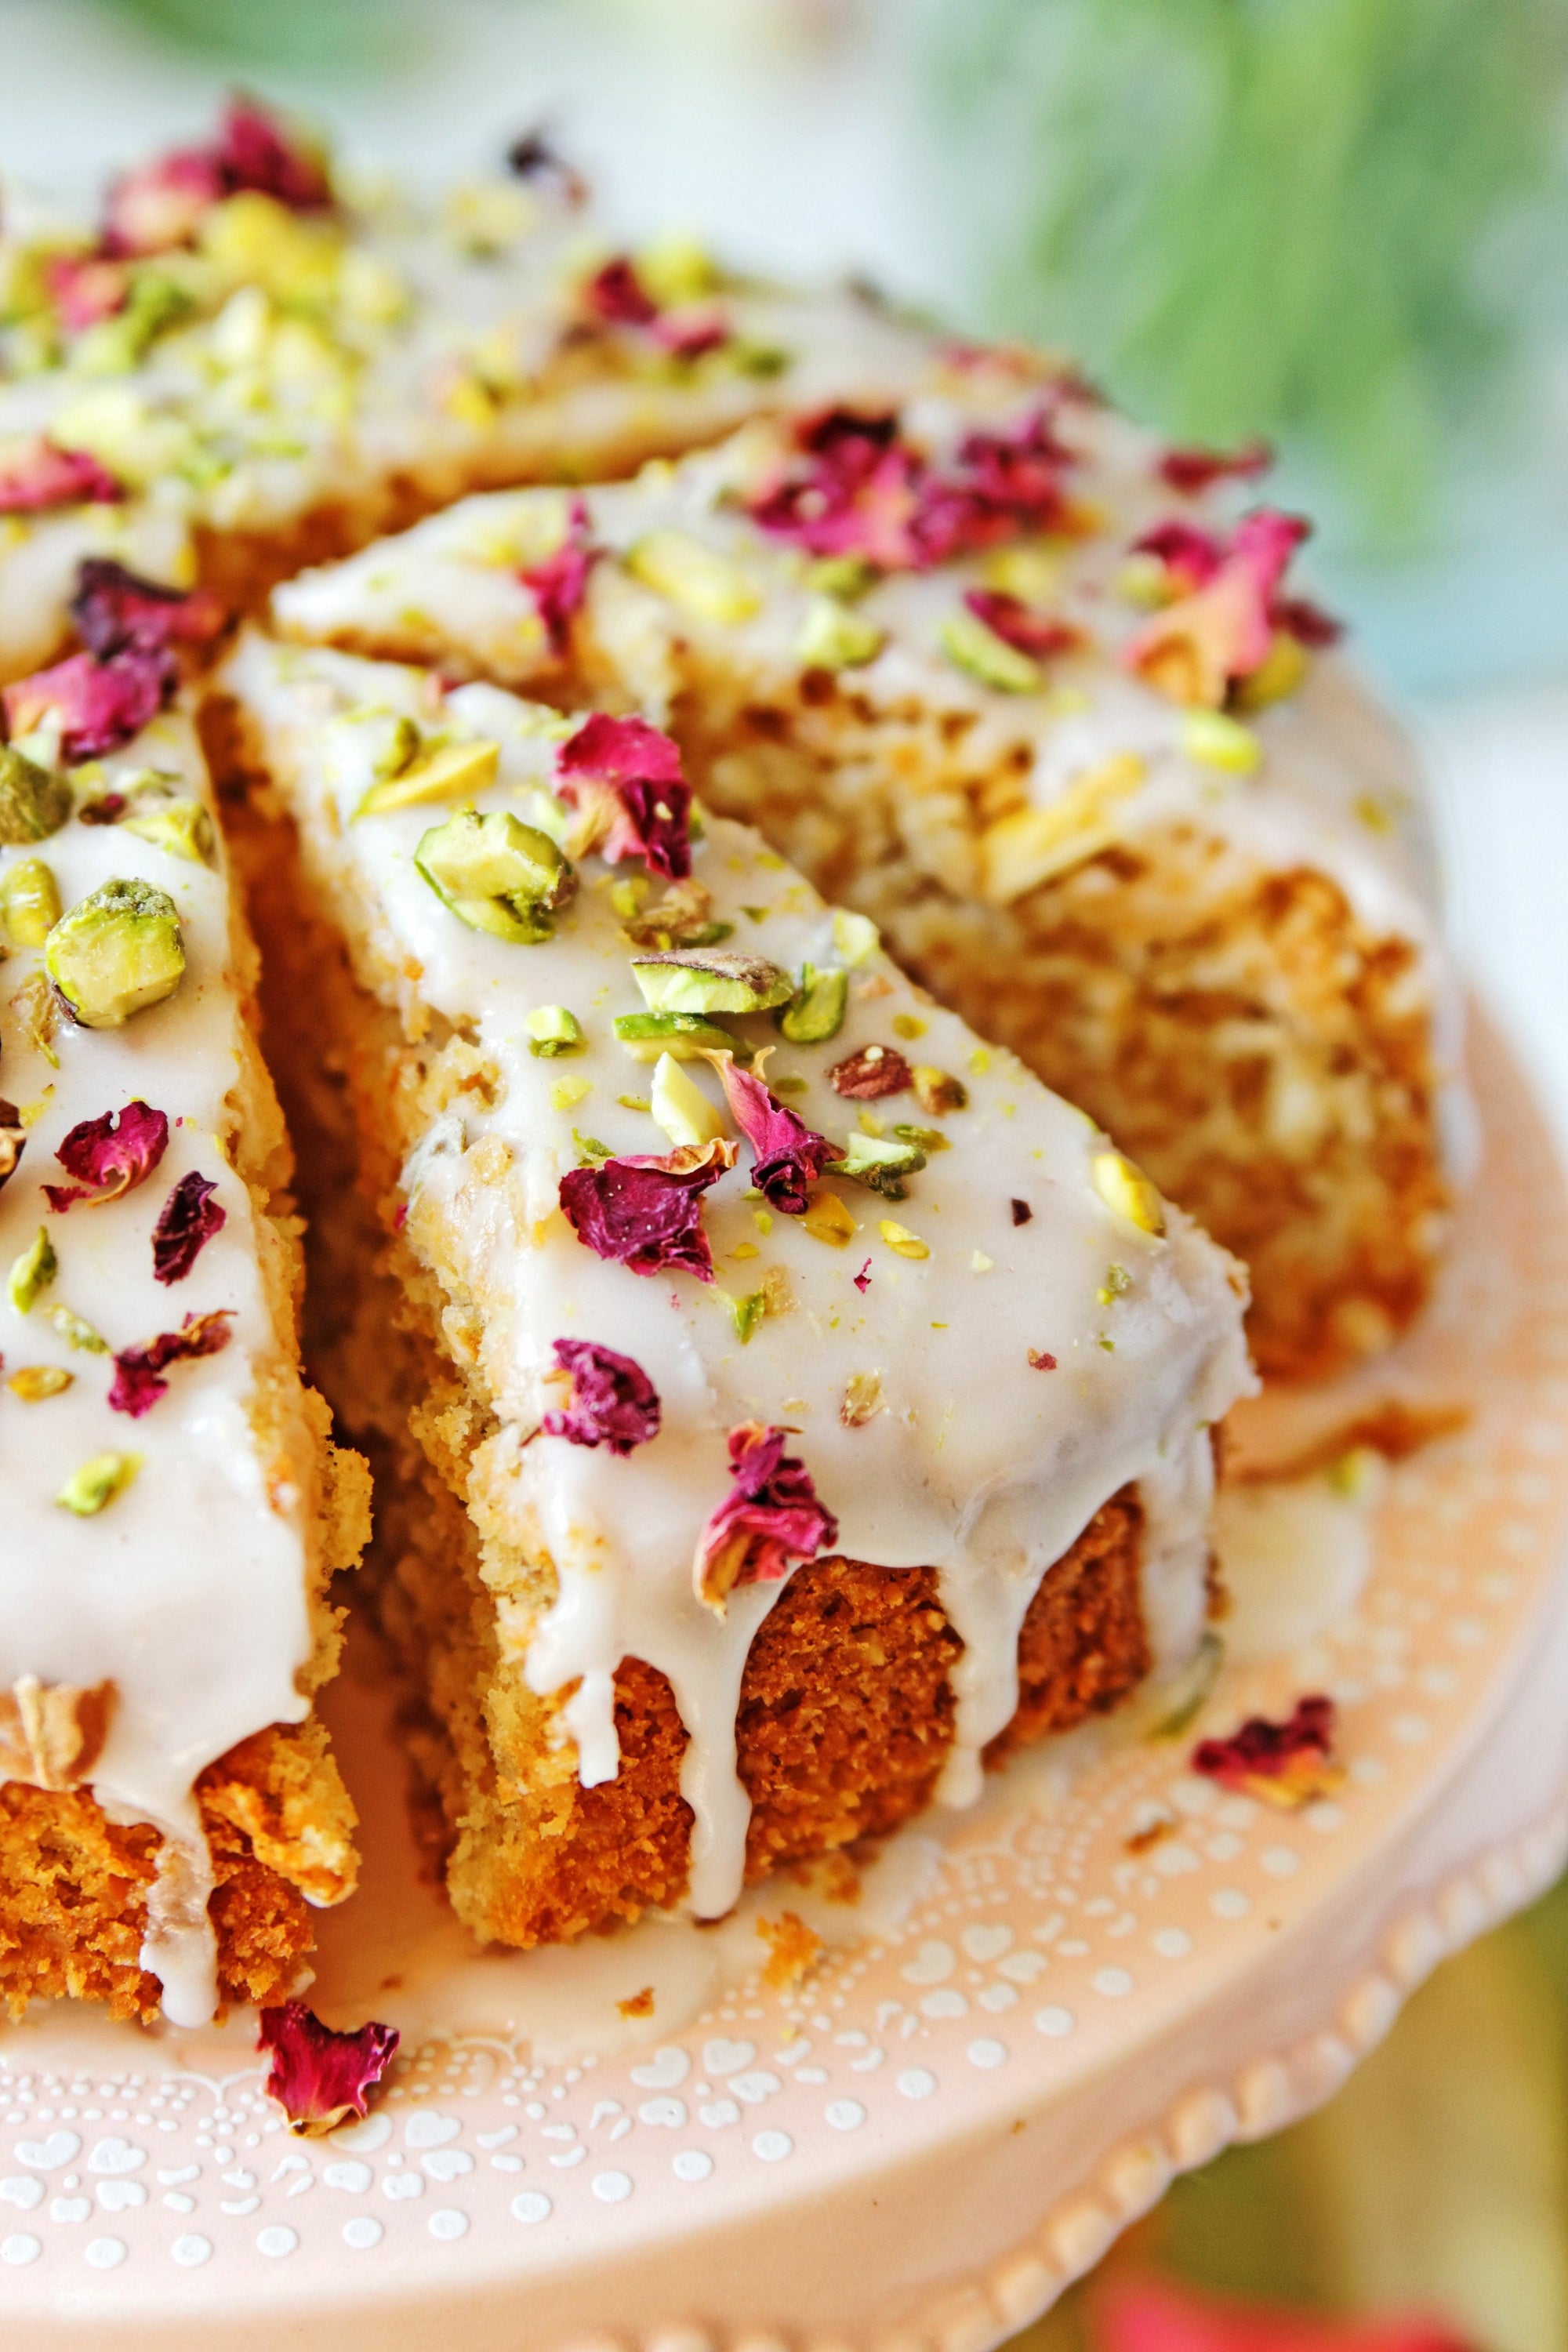 A close-up of a slice of cake topped with glossy white icing, bits of pistachios, and rose petals. The cake sits on a decorative peach-colored plate, with the rest of the cake visible in the background, also topped with icing and garnishes. Enjoy this delightful treat with a cup of Libra- Pistachio-Rose Persian Love Cake Tea with White Pearls & Shatavari by Magic Hour.